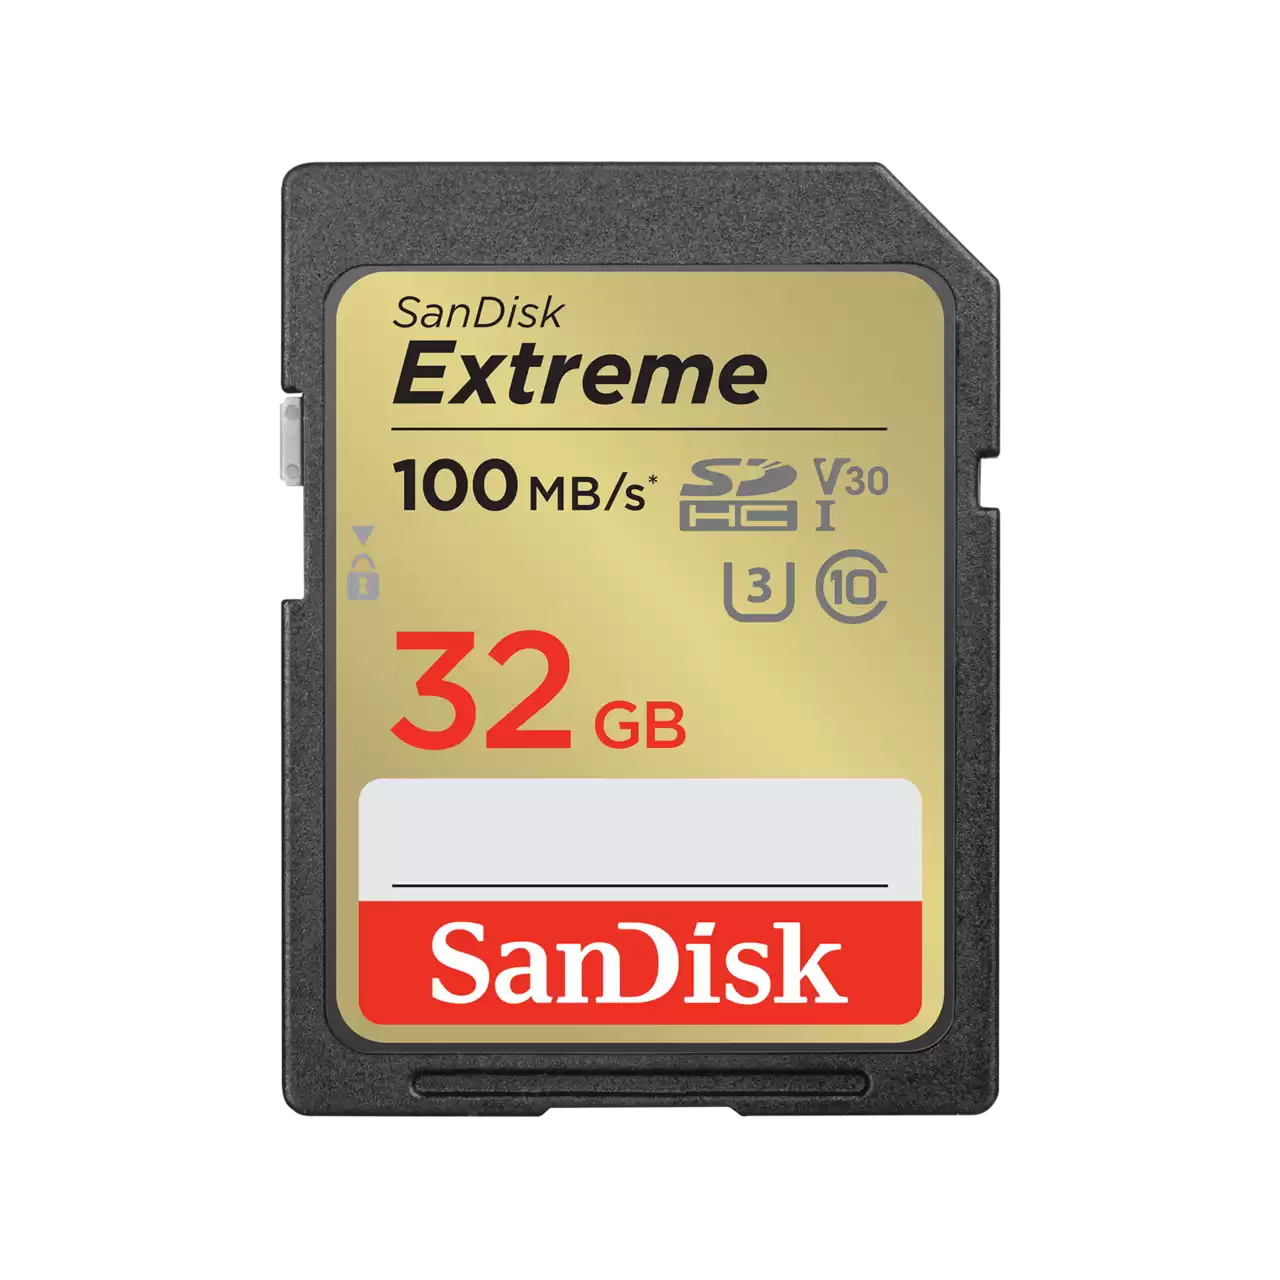 SanDisk Extreme 32GB sd Card